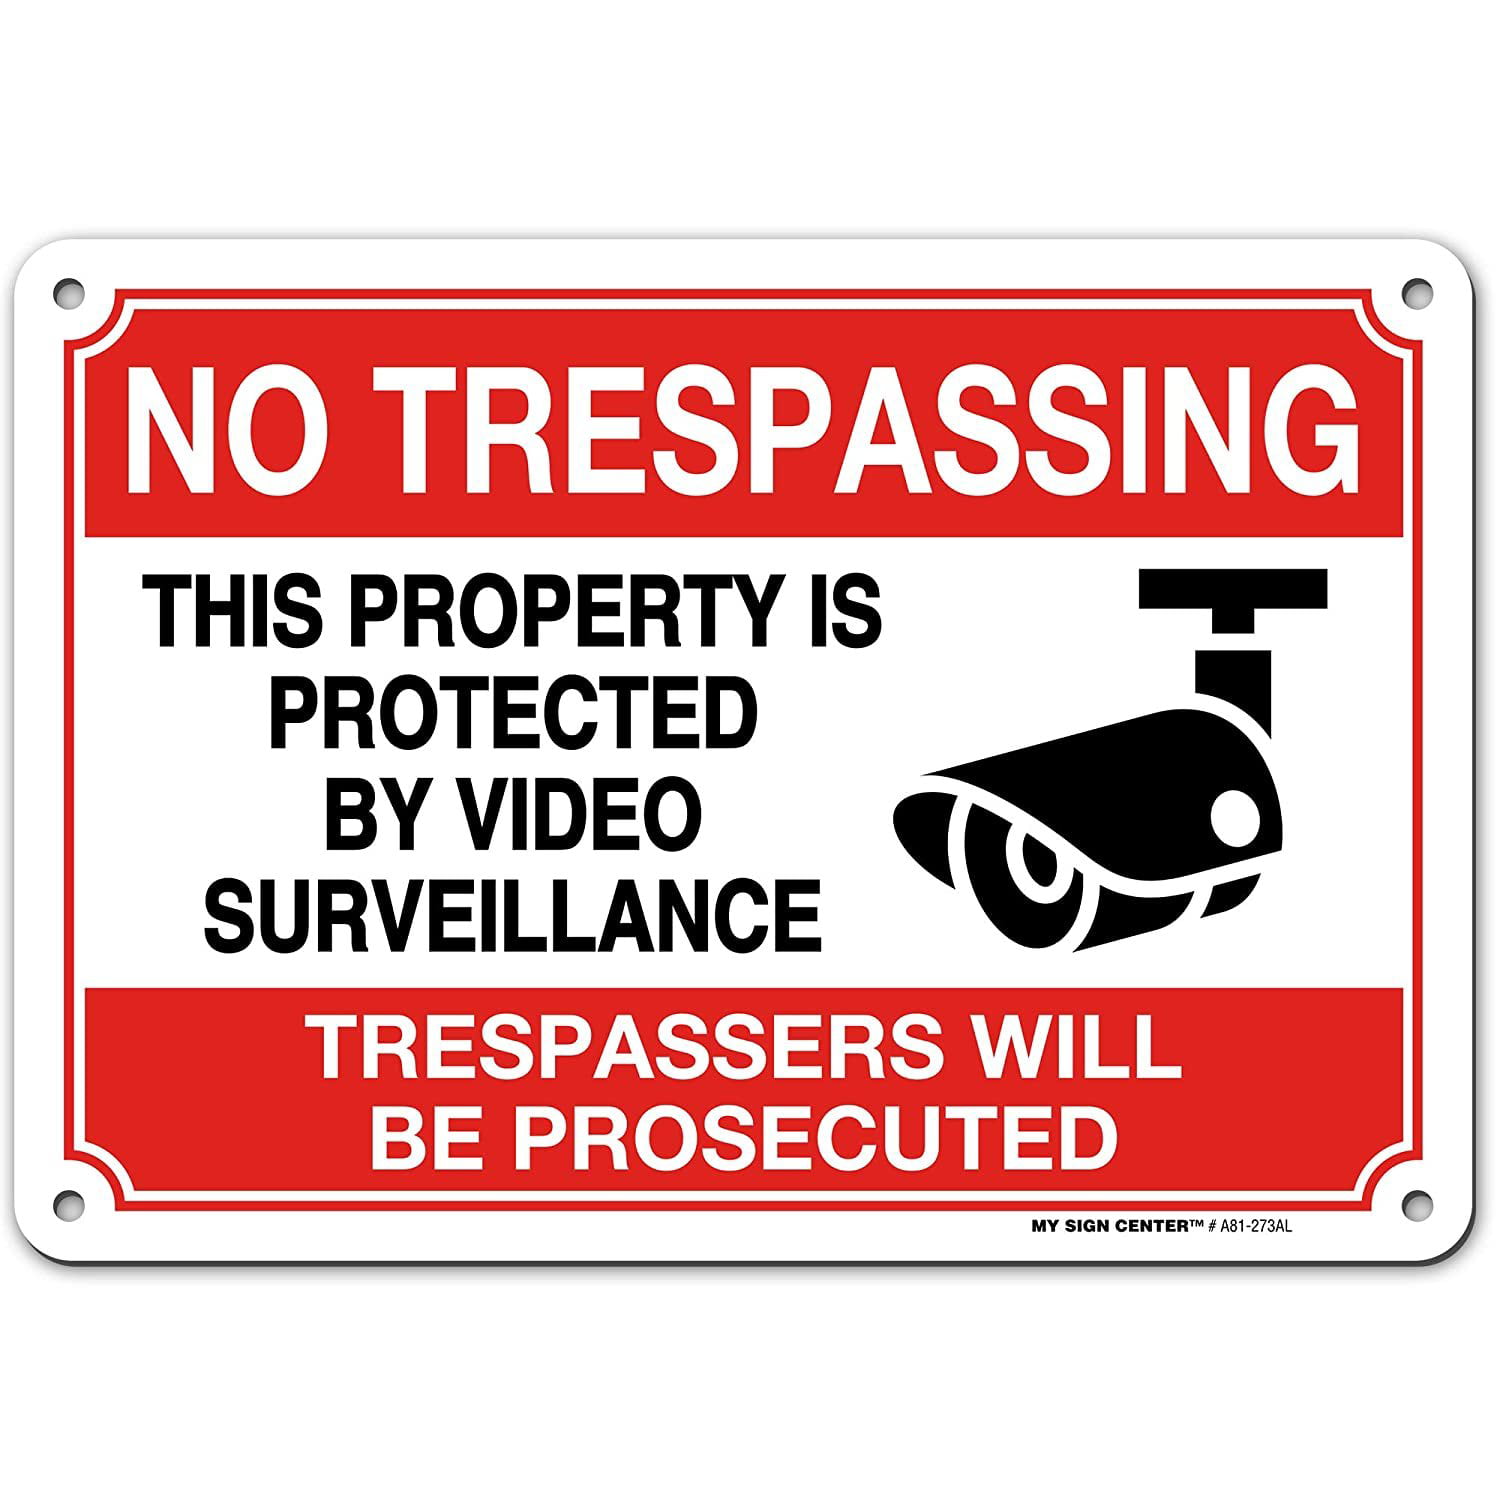 This Property Protected  Video Surveillance Trespassers Prosecuted SIGN 8"x12" 